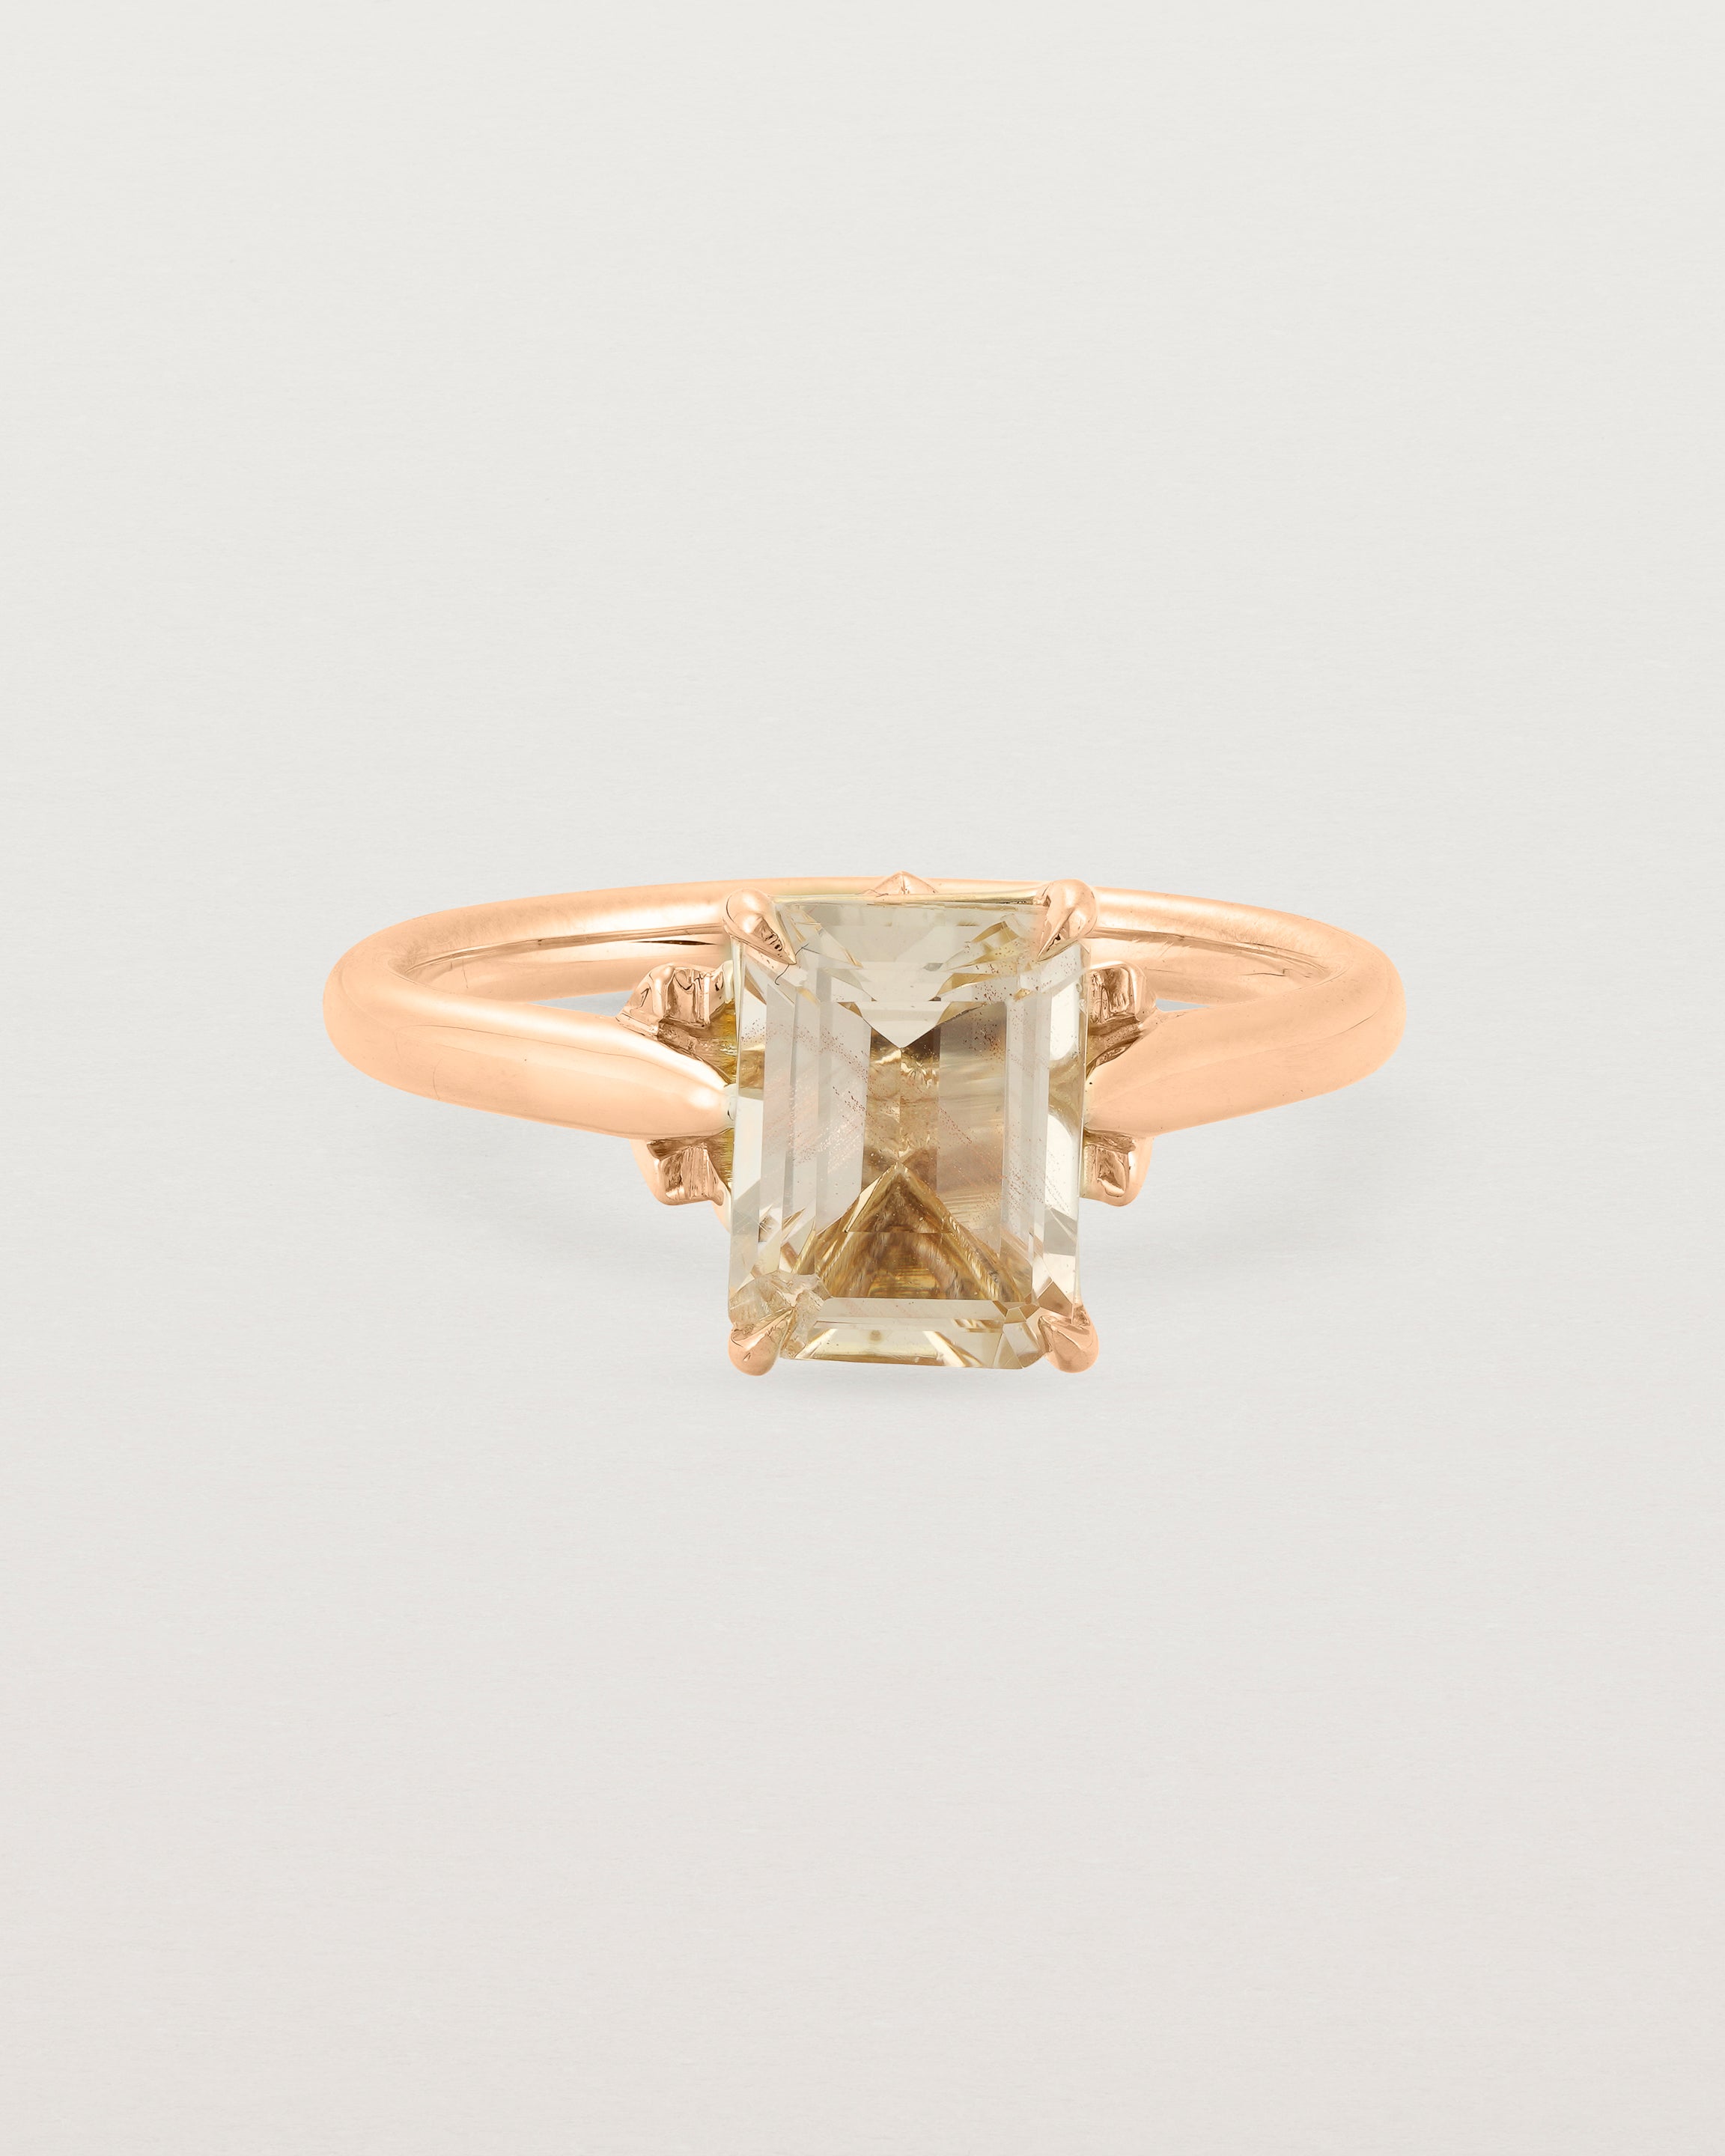 Front view of the Kalina Emerald Solitaire | Savannah Sunstone | Rose Gold.